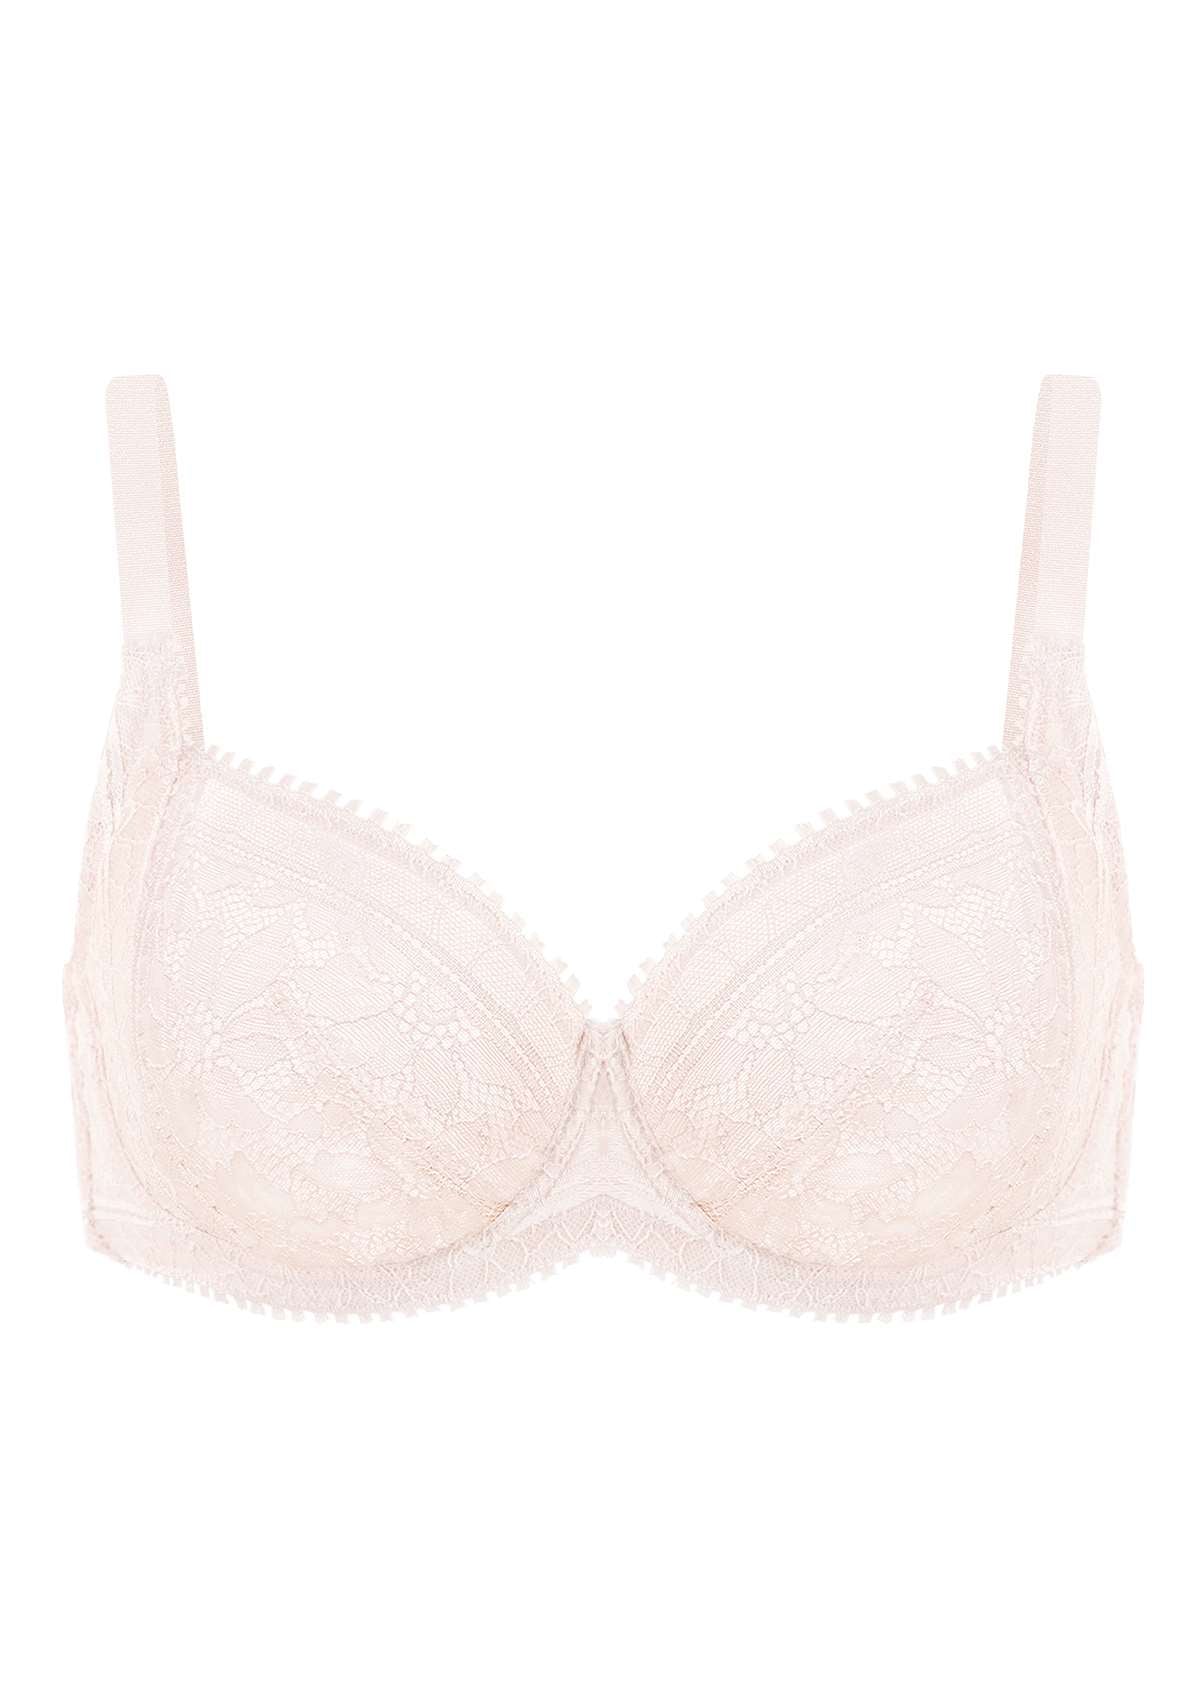 HSIA Silene Floral Delicate Unlined Lace Soft Cup Uplift Bra - Champagne / 38 / DDD/F